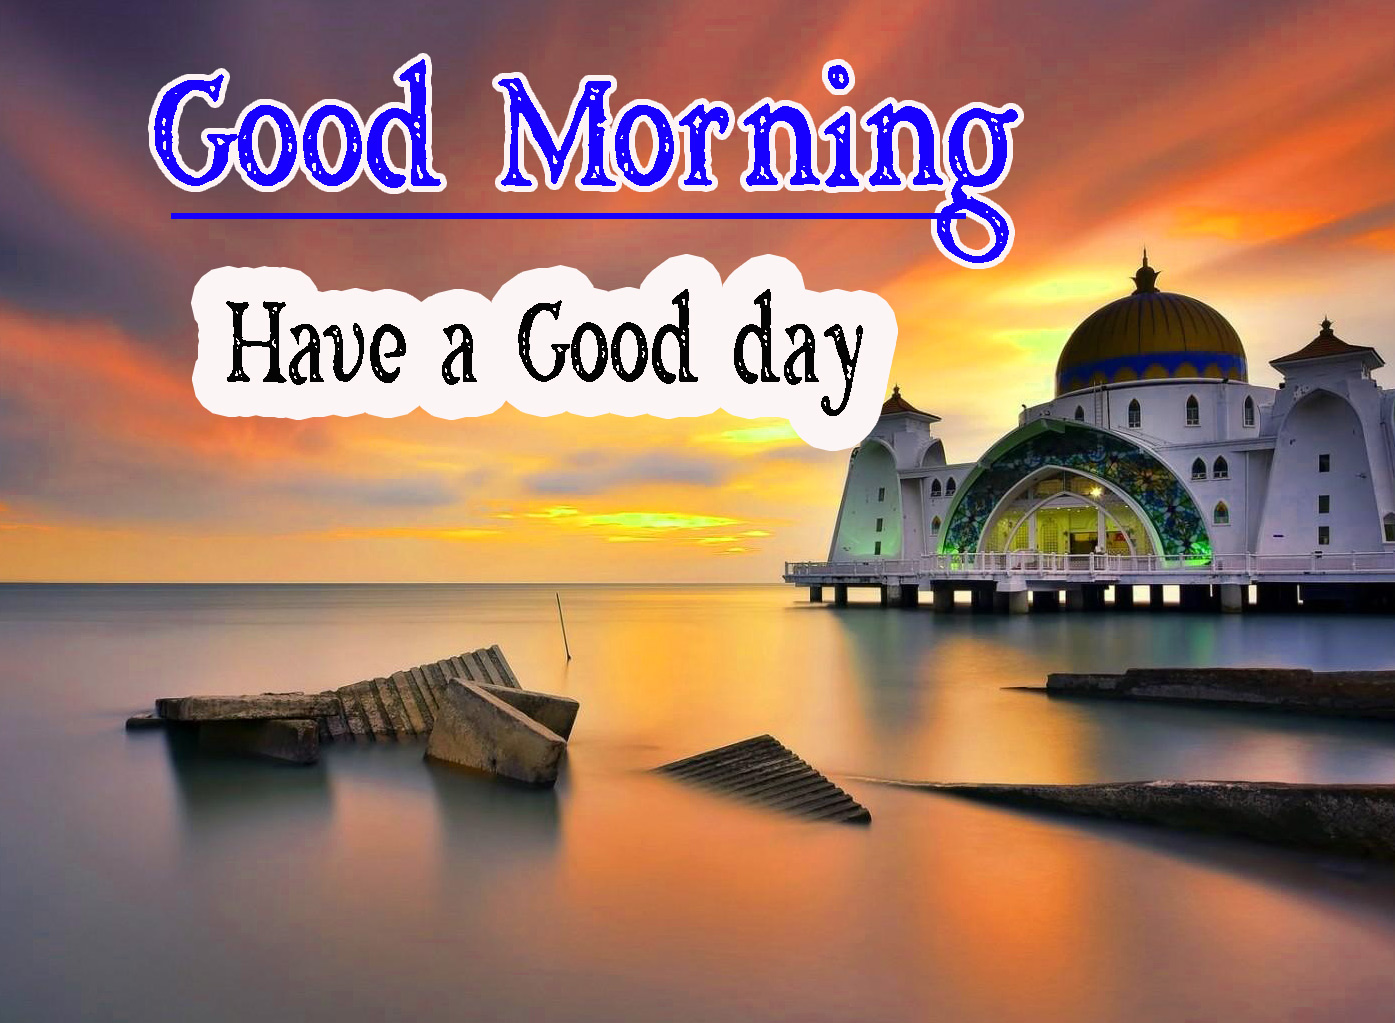 New Free 1080p Very Good Morning Images Pics Download 